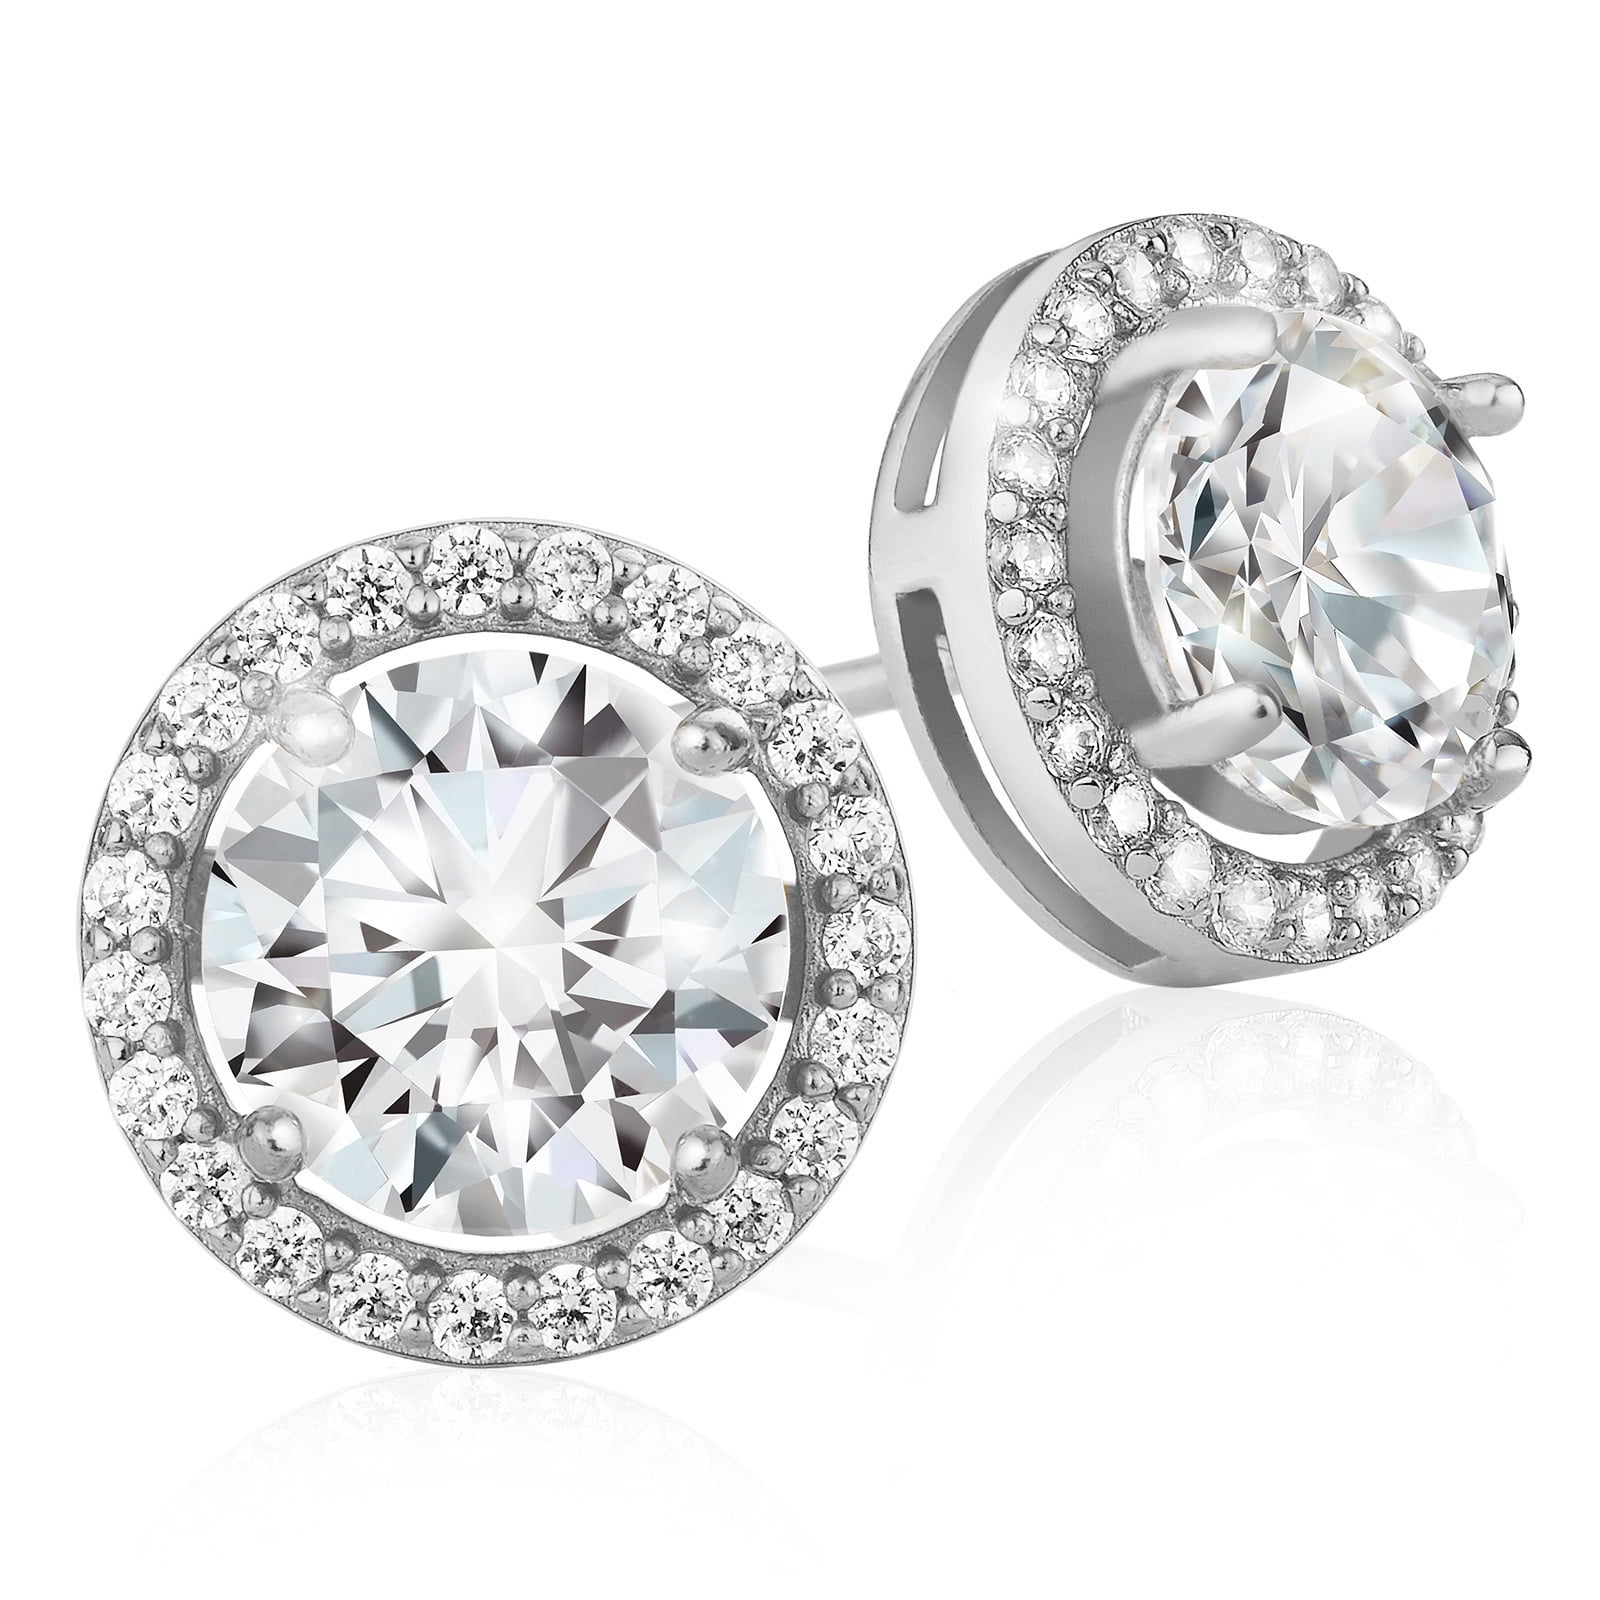 Jewel Tie 925 Sterling Silver Yellow Gold-Plated Diamond Square Shaped Halo Micro Pave Set Studs Earrings 1/6 cttw.